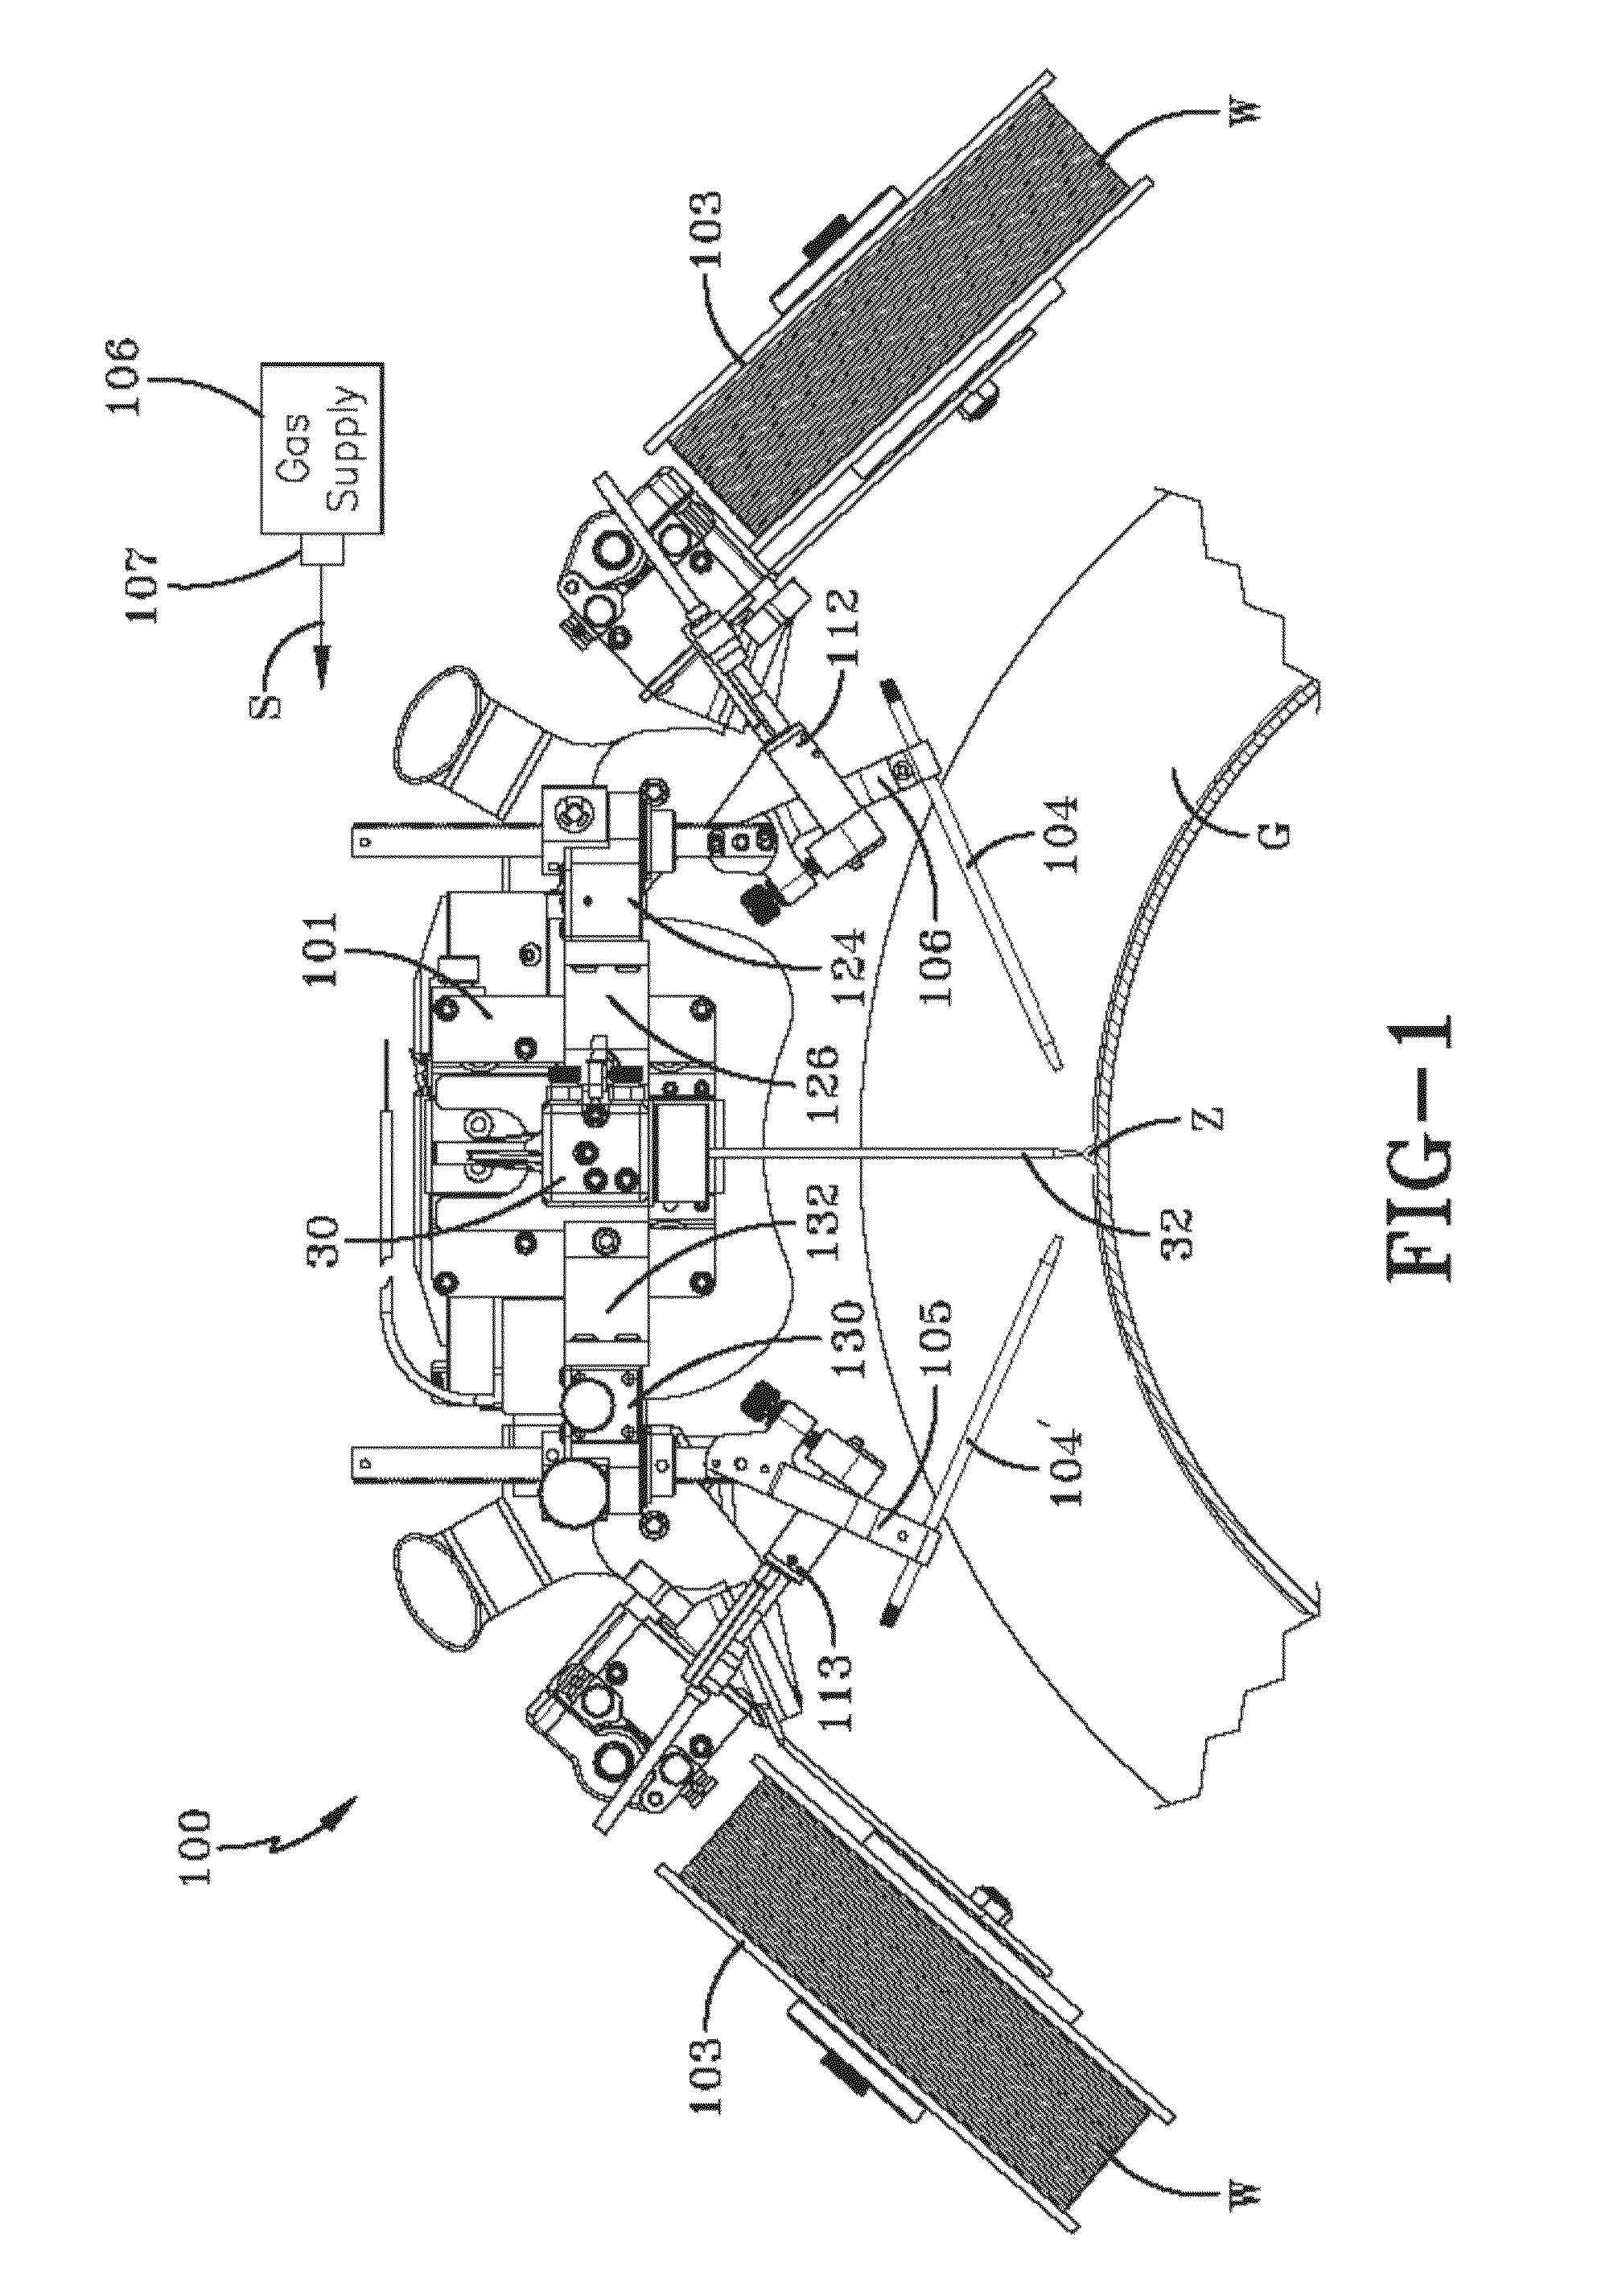 System and method for delivering negative polarity current to release gas from a welding puddle